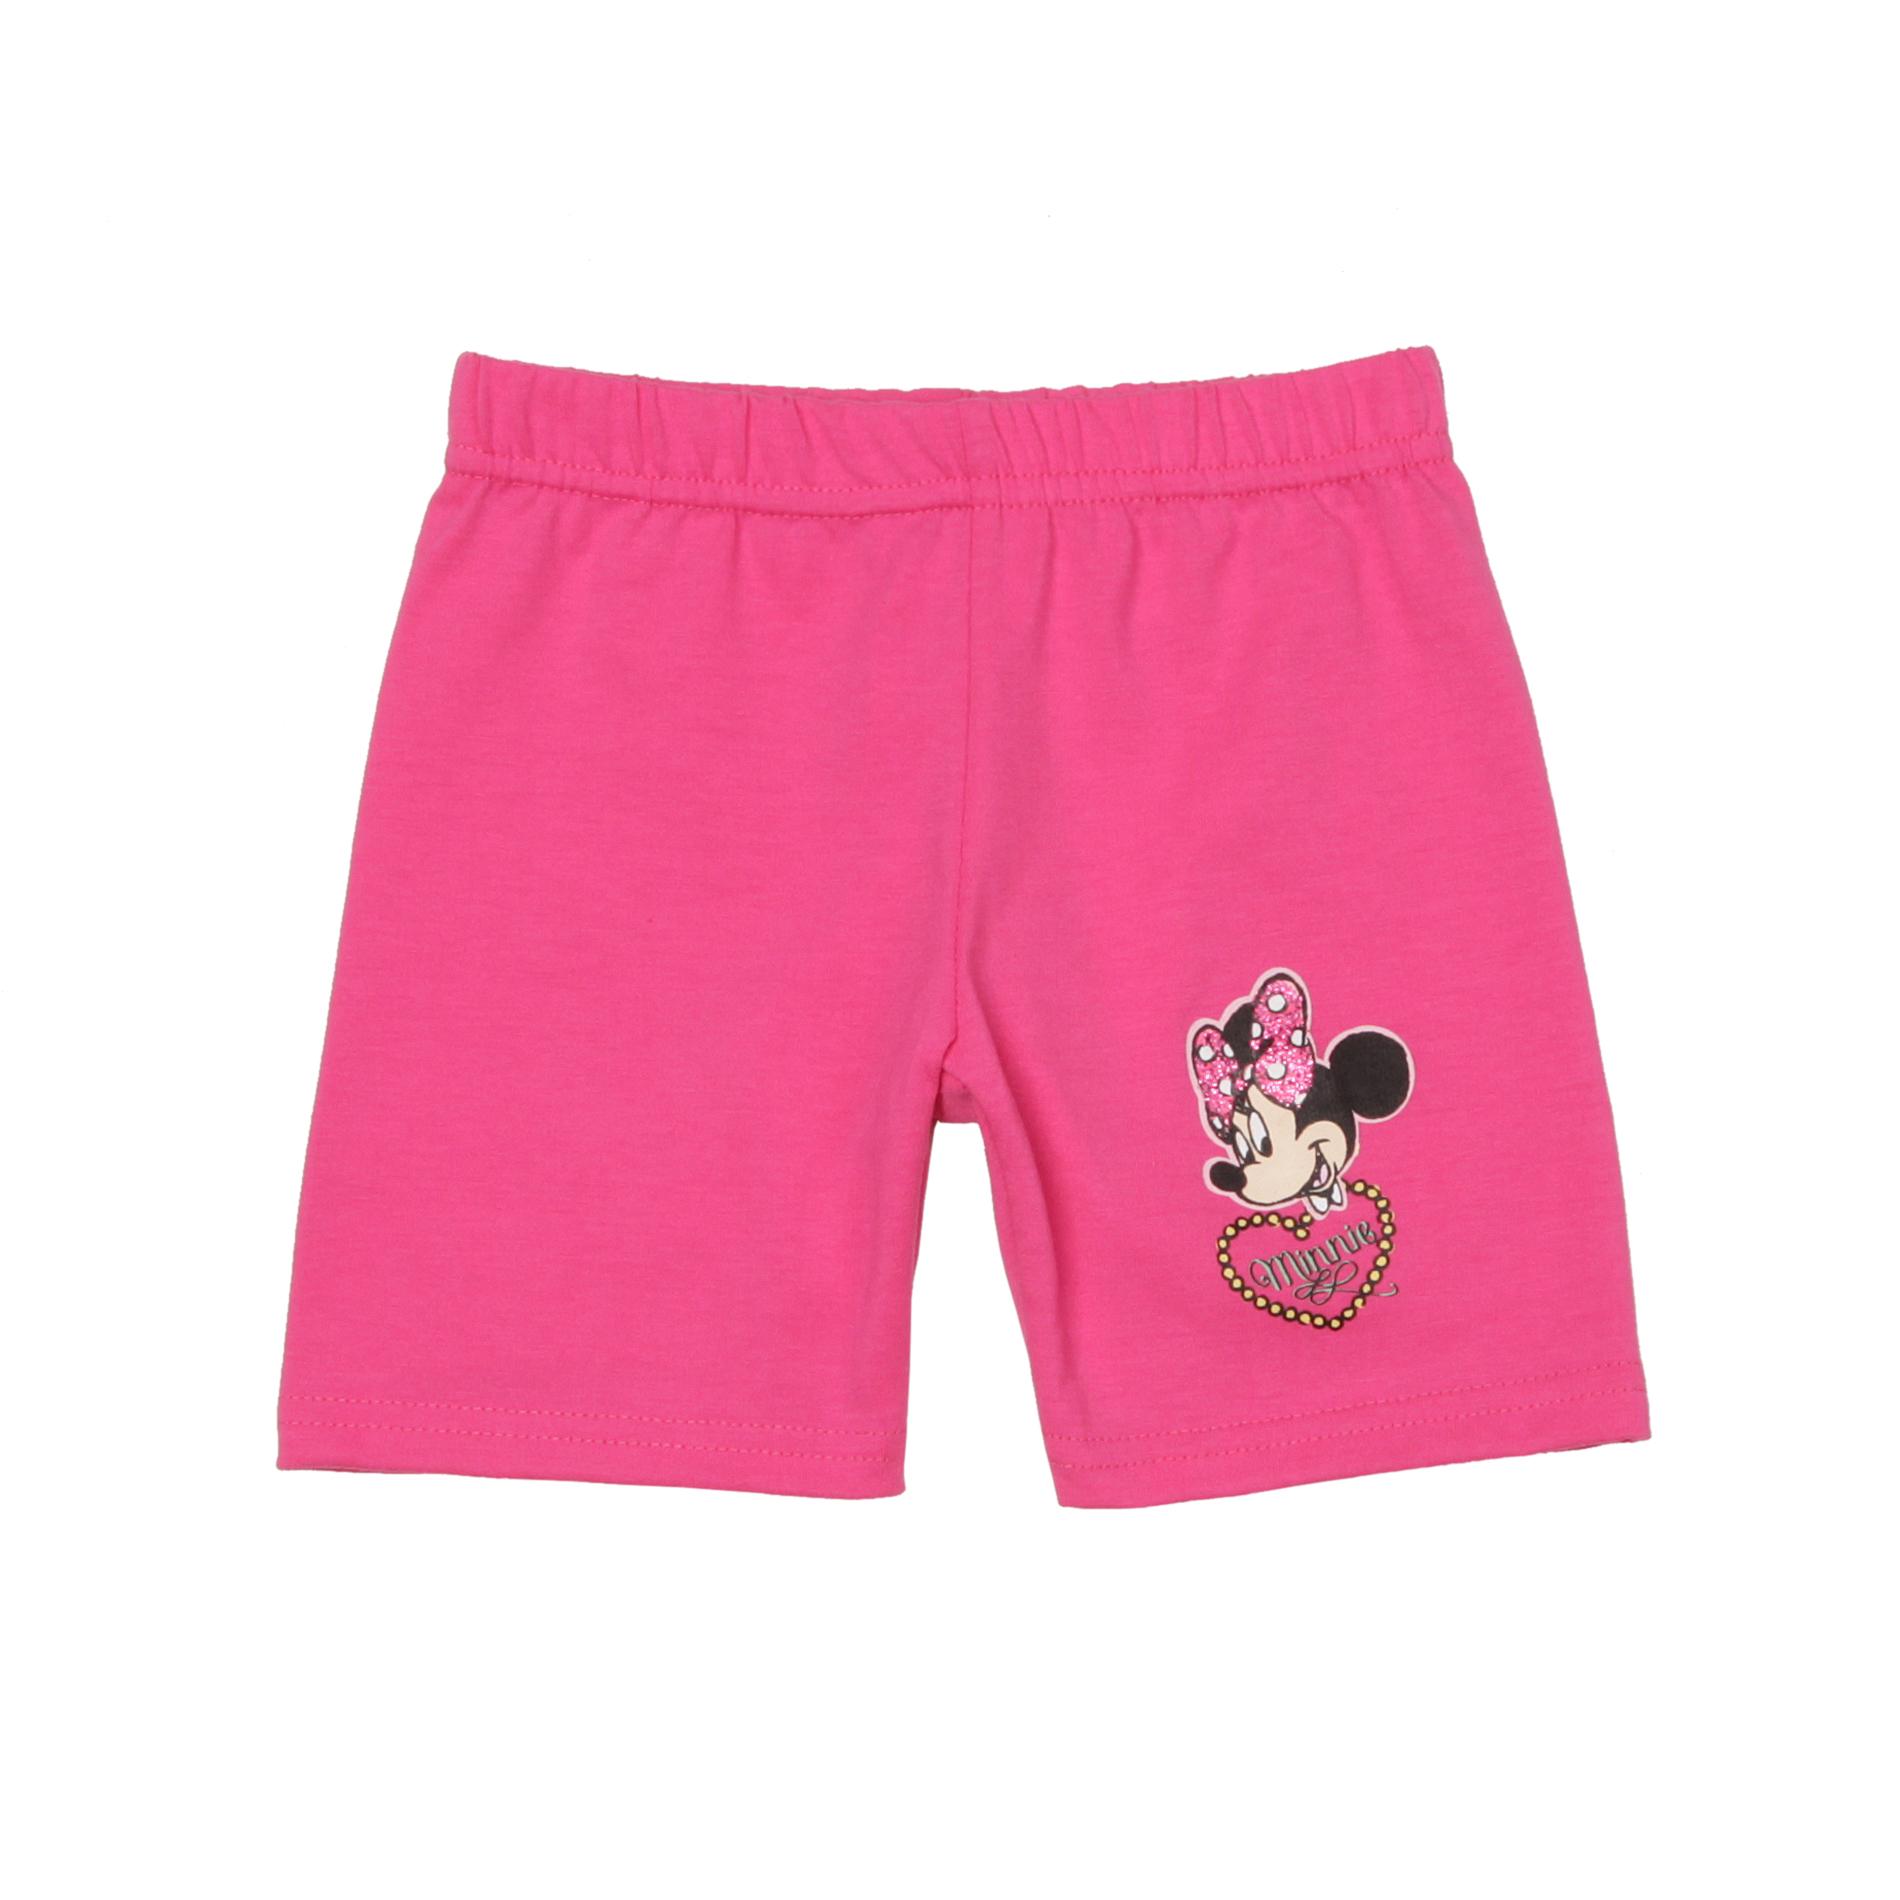 Disney Minnie Mouse Girl's Knit Shorts